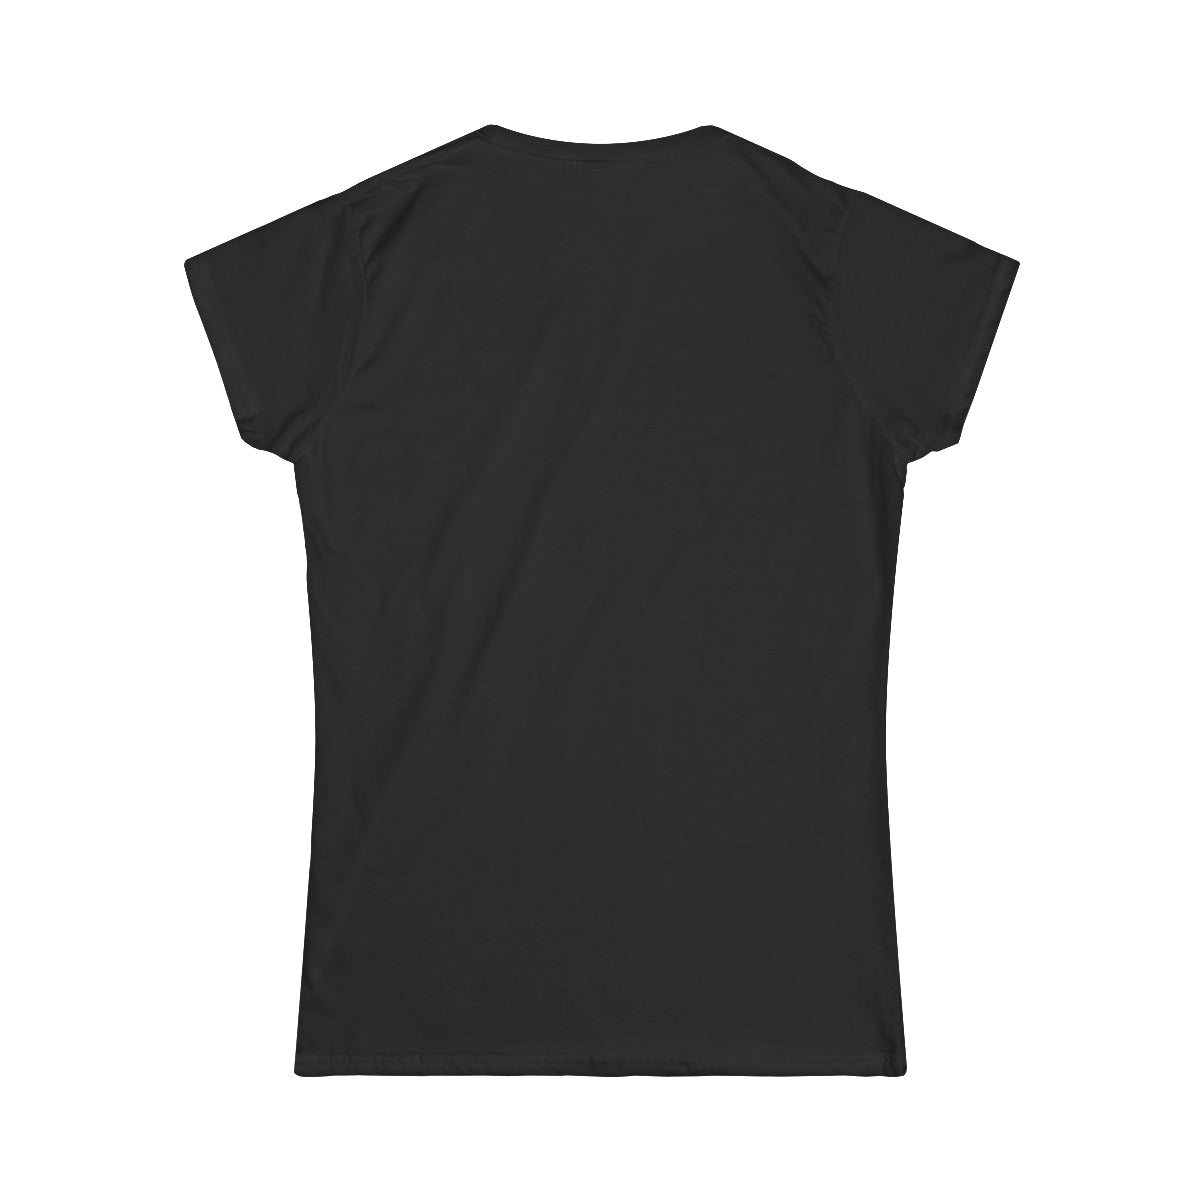 Fitted Basic Mommy Mode Tee - Black